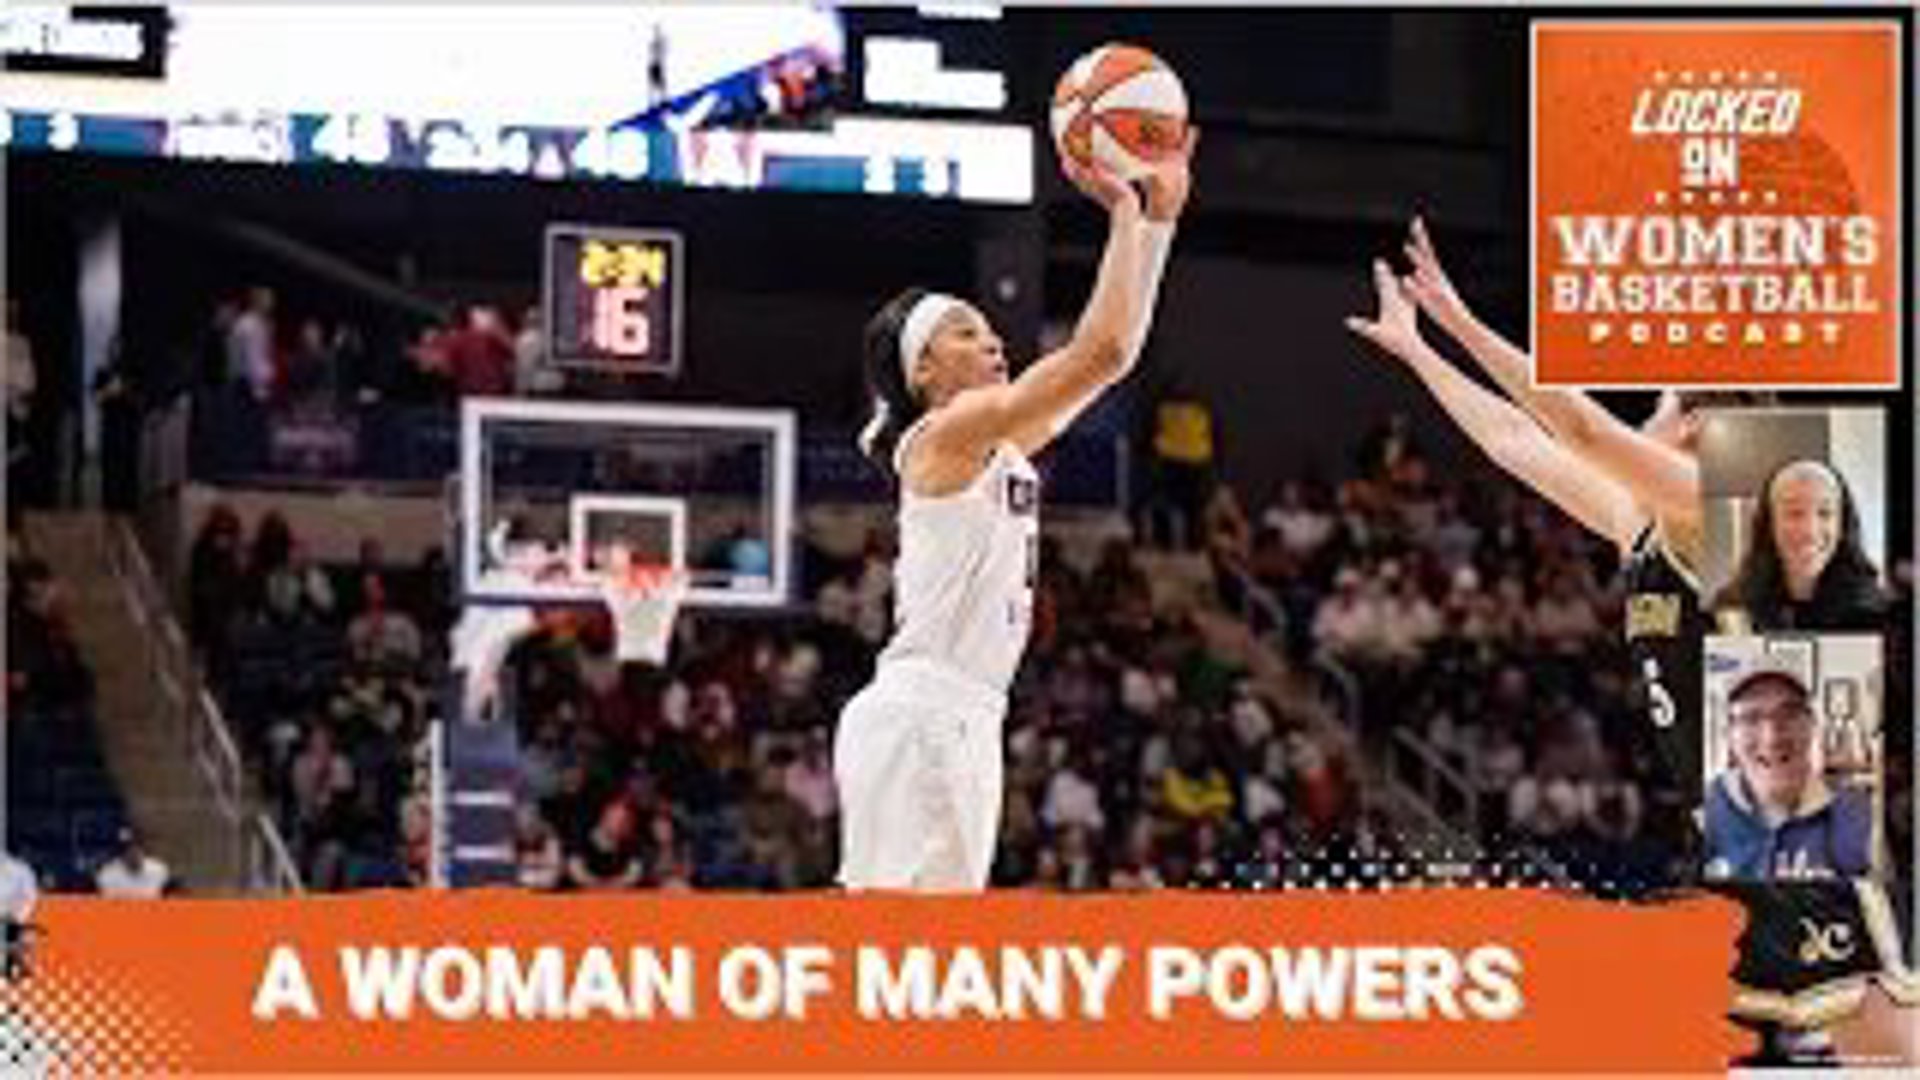 Aerial Powers has enjoyed a distinguished WNBA career already, including a championship with the 2019 Washington Mystics.